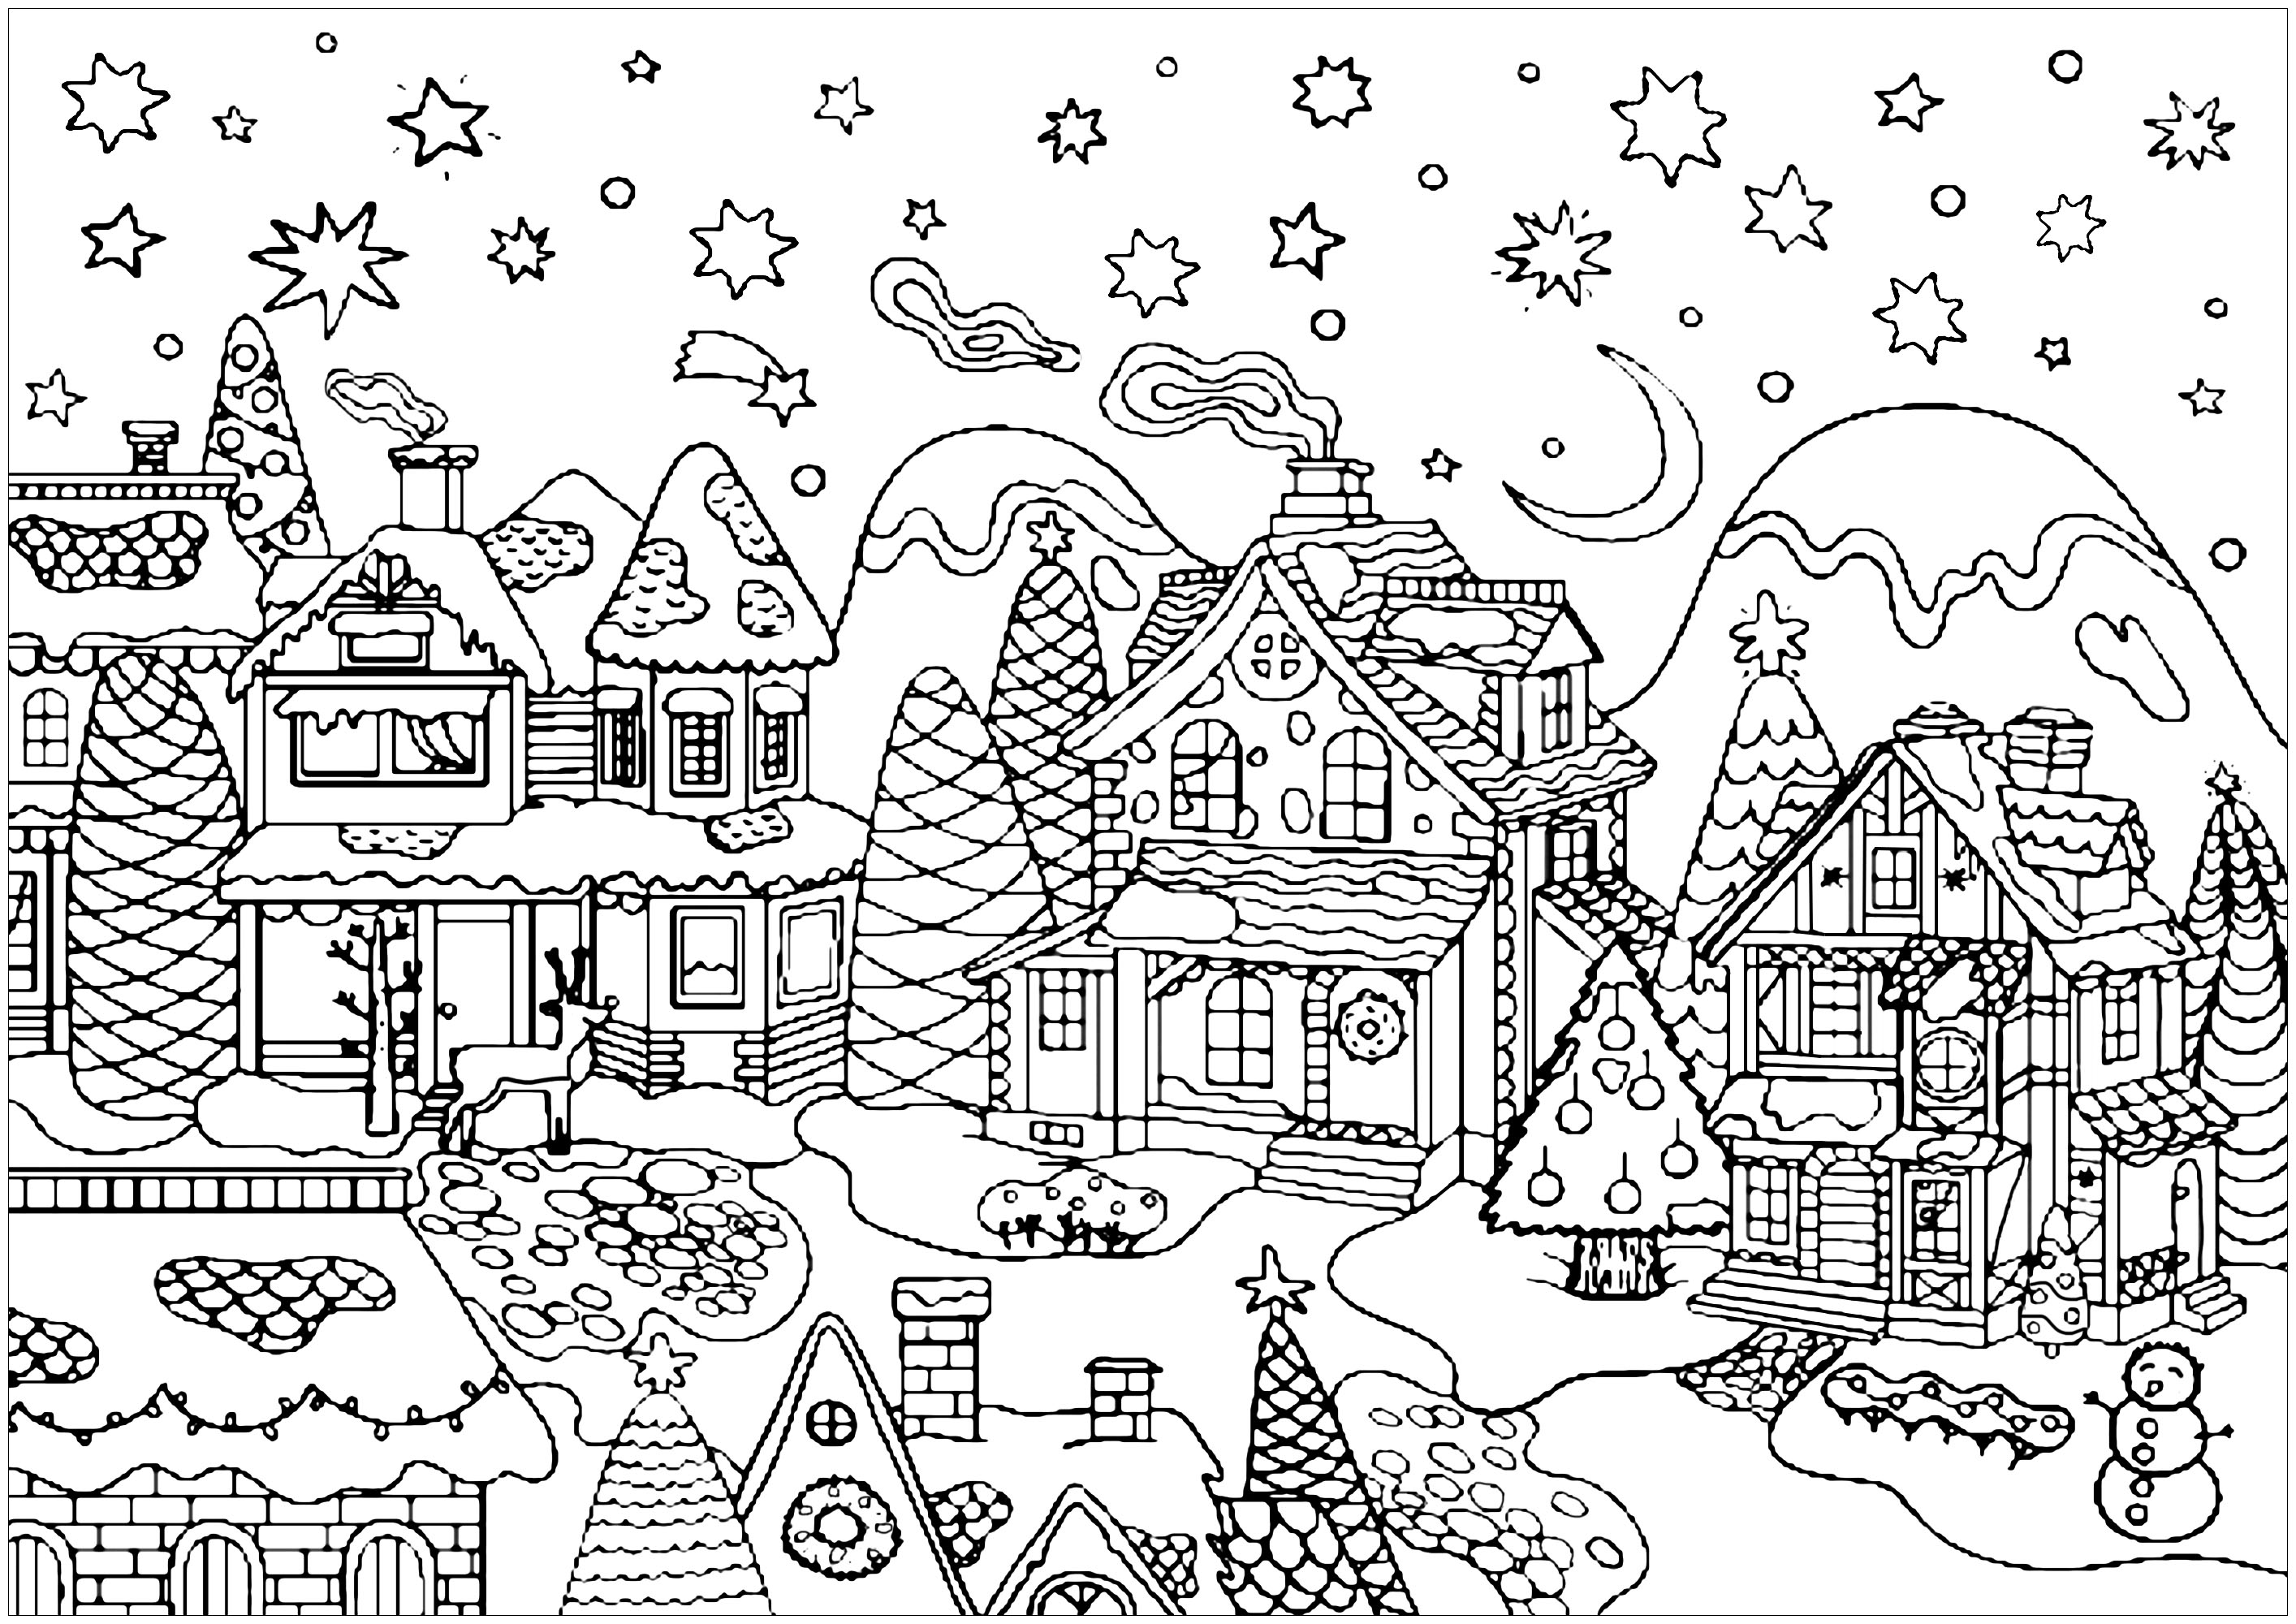 Download Cute Christmas village - Christmas Adult Coloring Pages